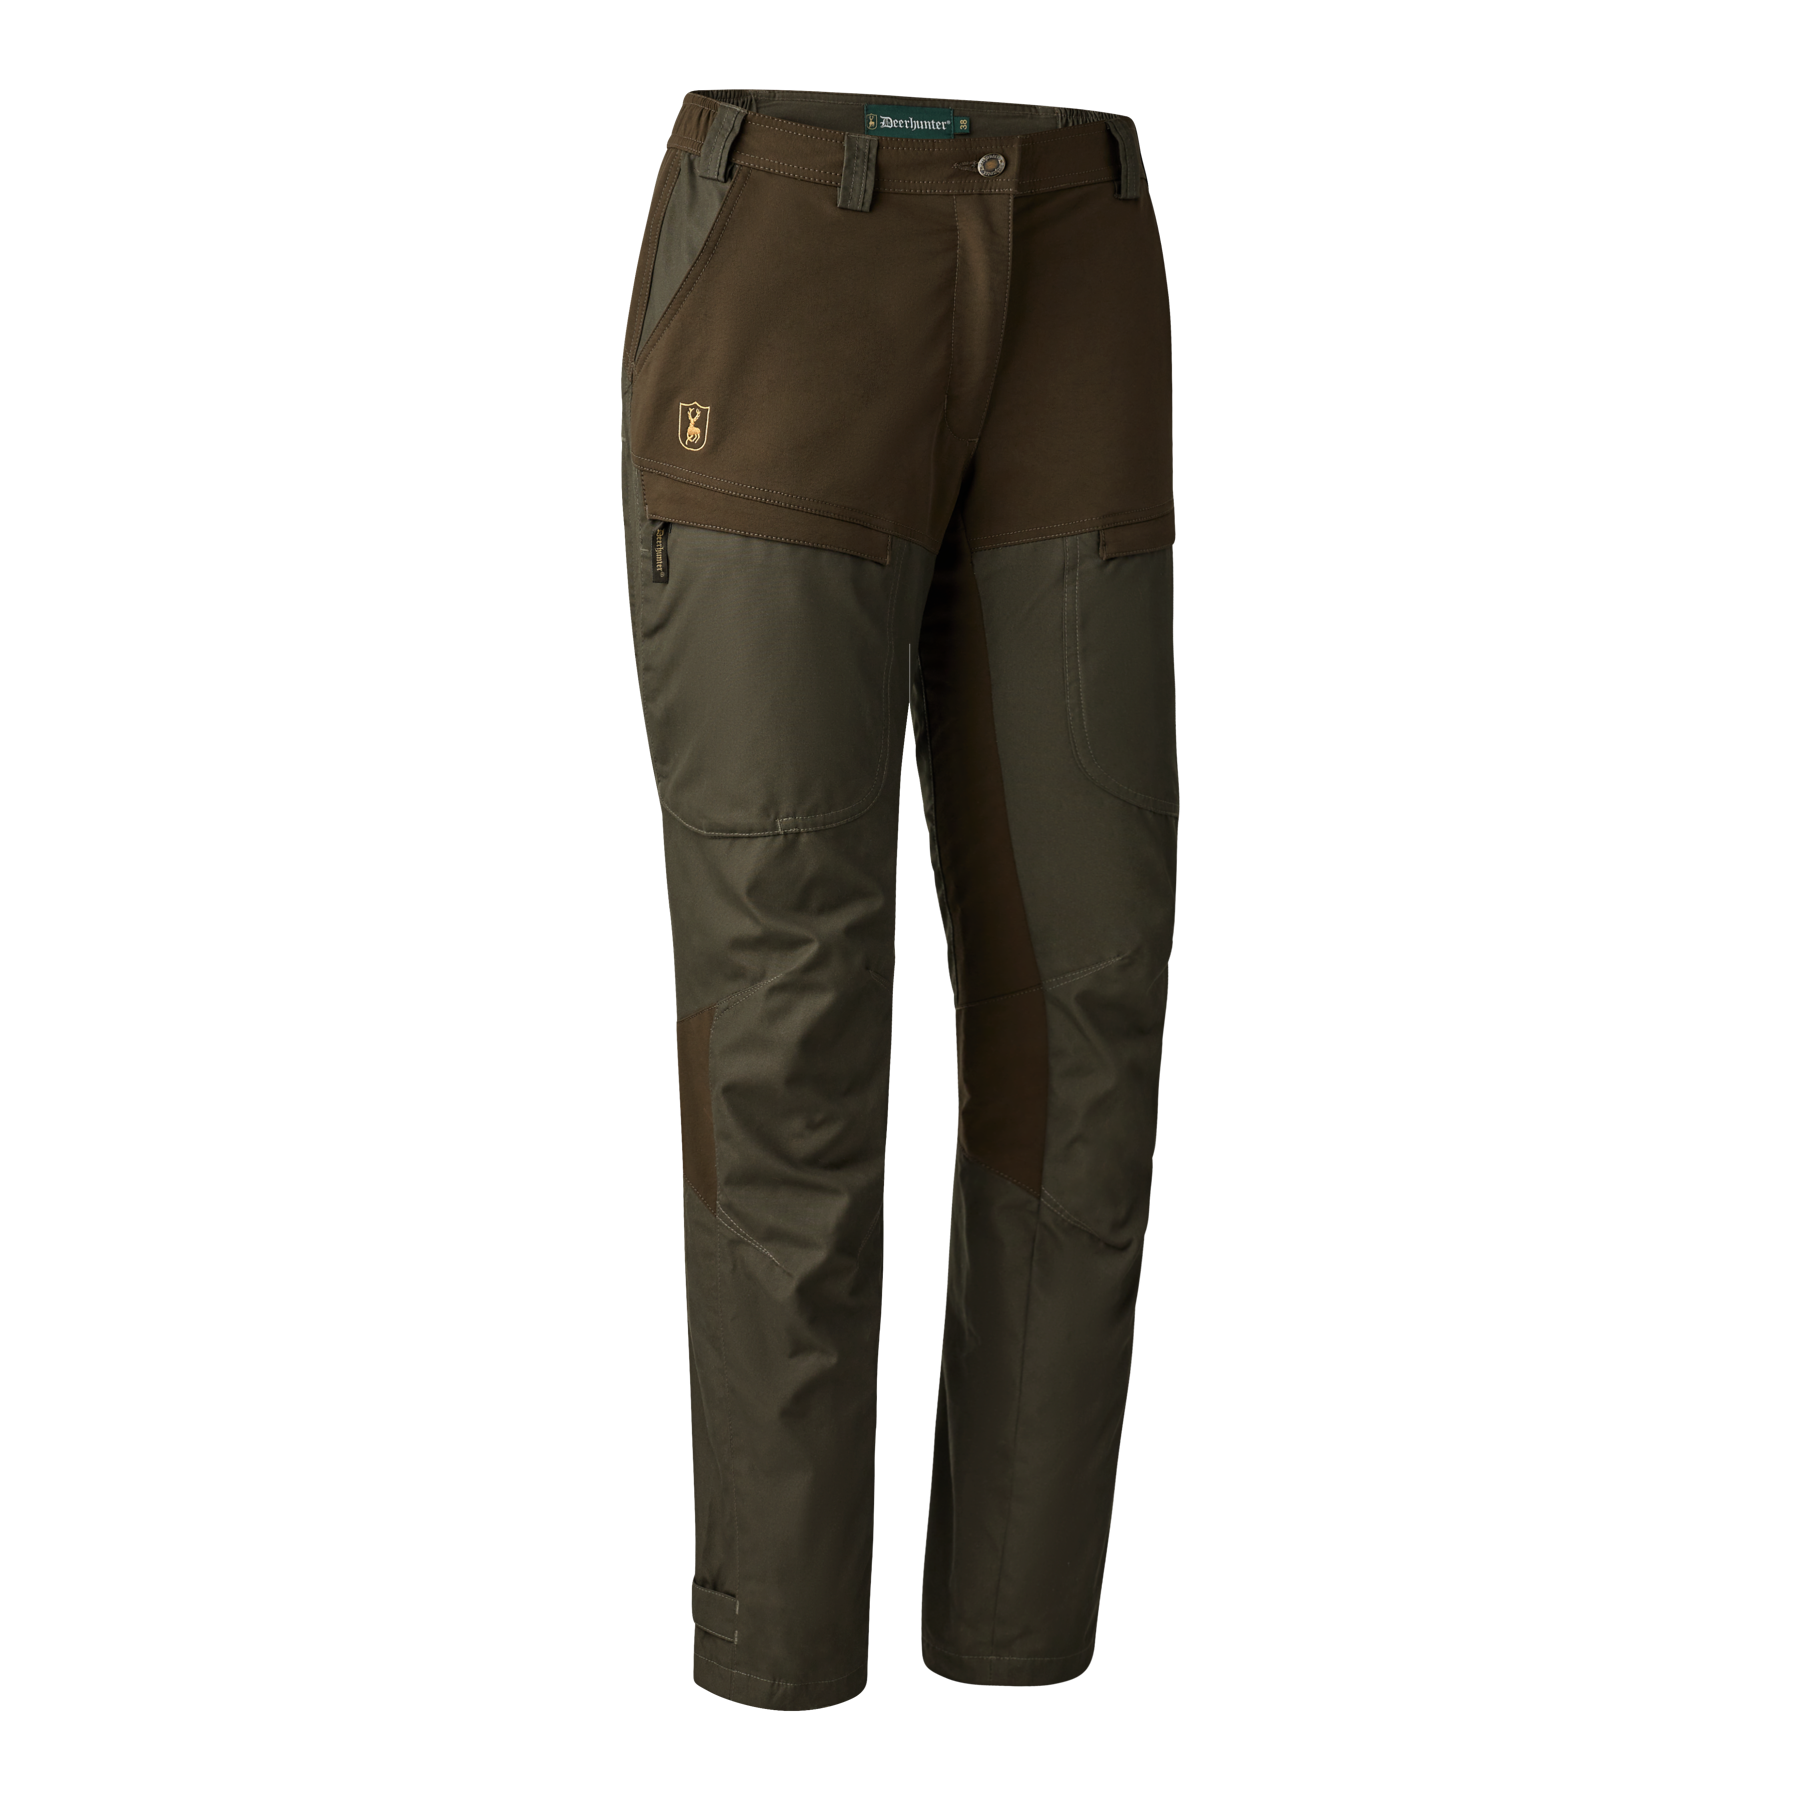 Lady Ann Trousers with membrane